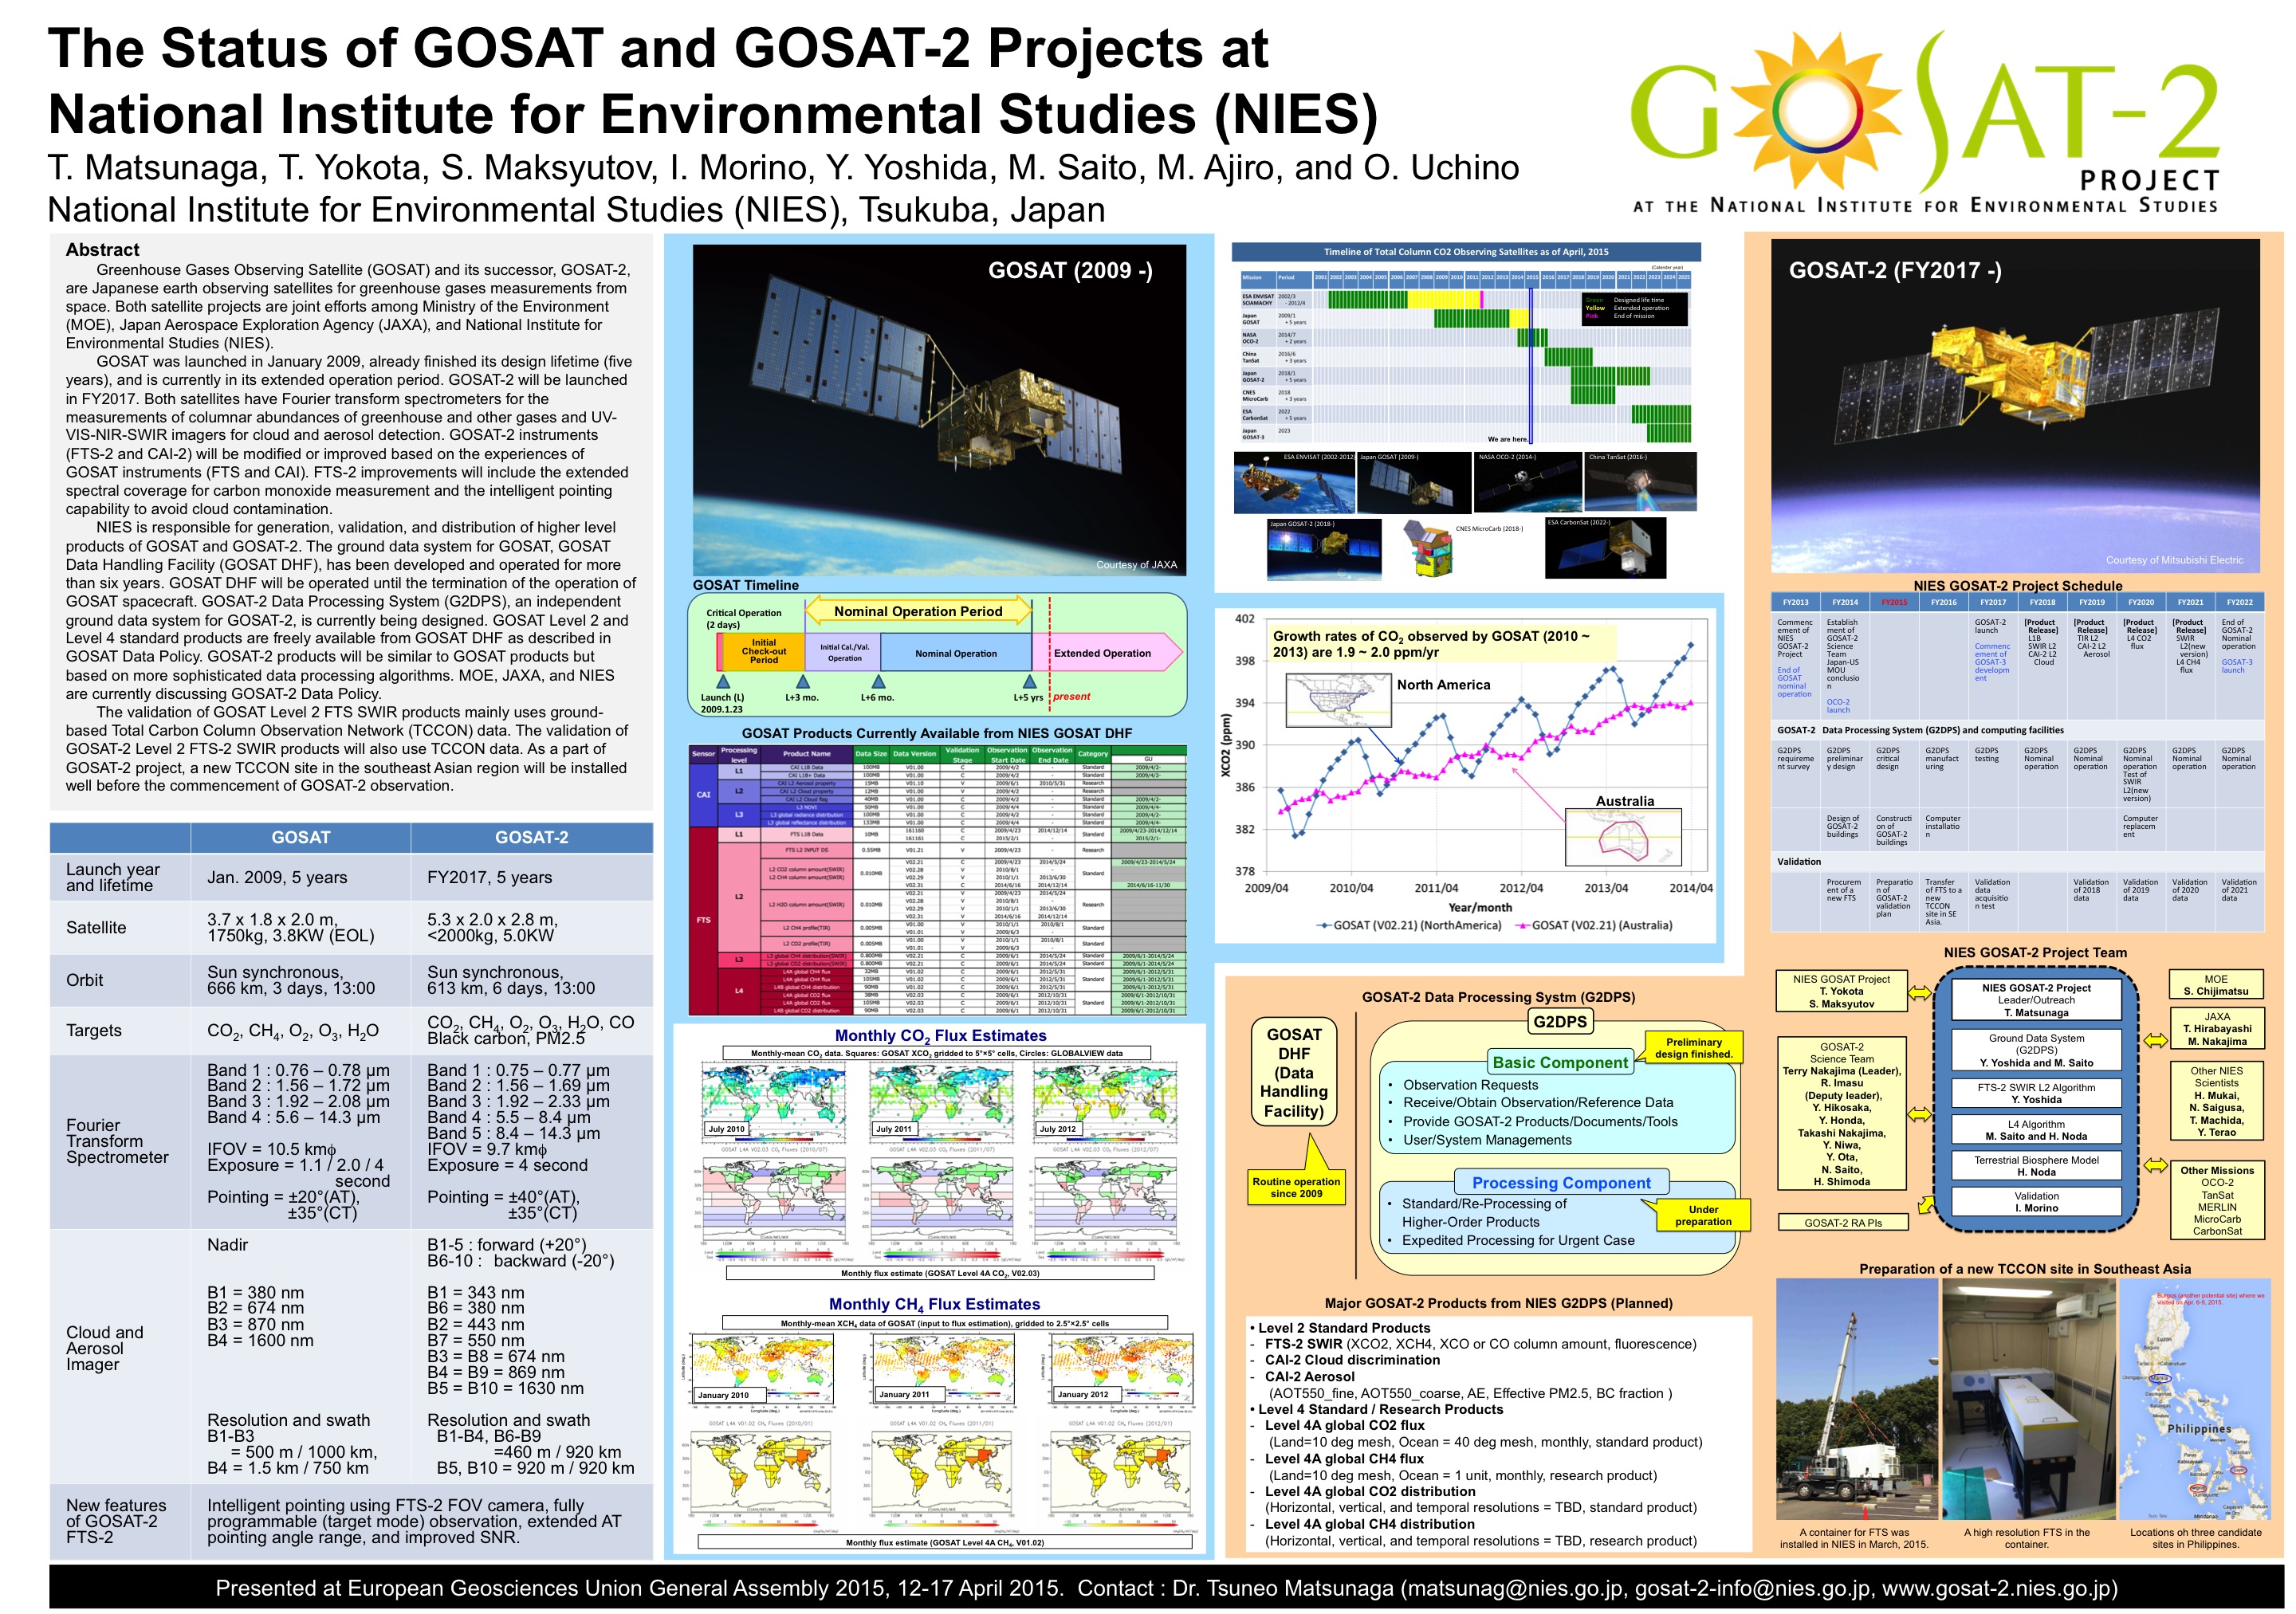 The Statuses of GOSAT and GOSAT-2 Projects at National Institute for Environmental Studies (NIES), Dr Tsuneo Matsunaga